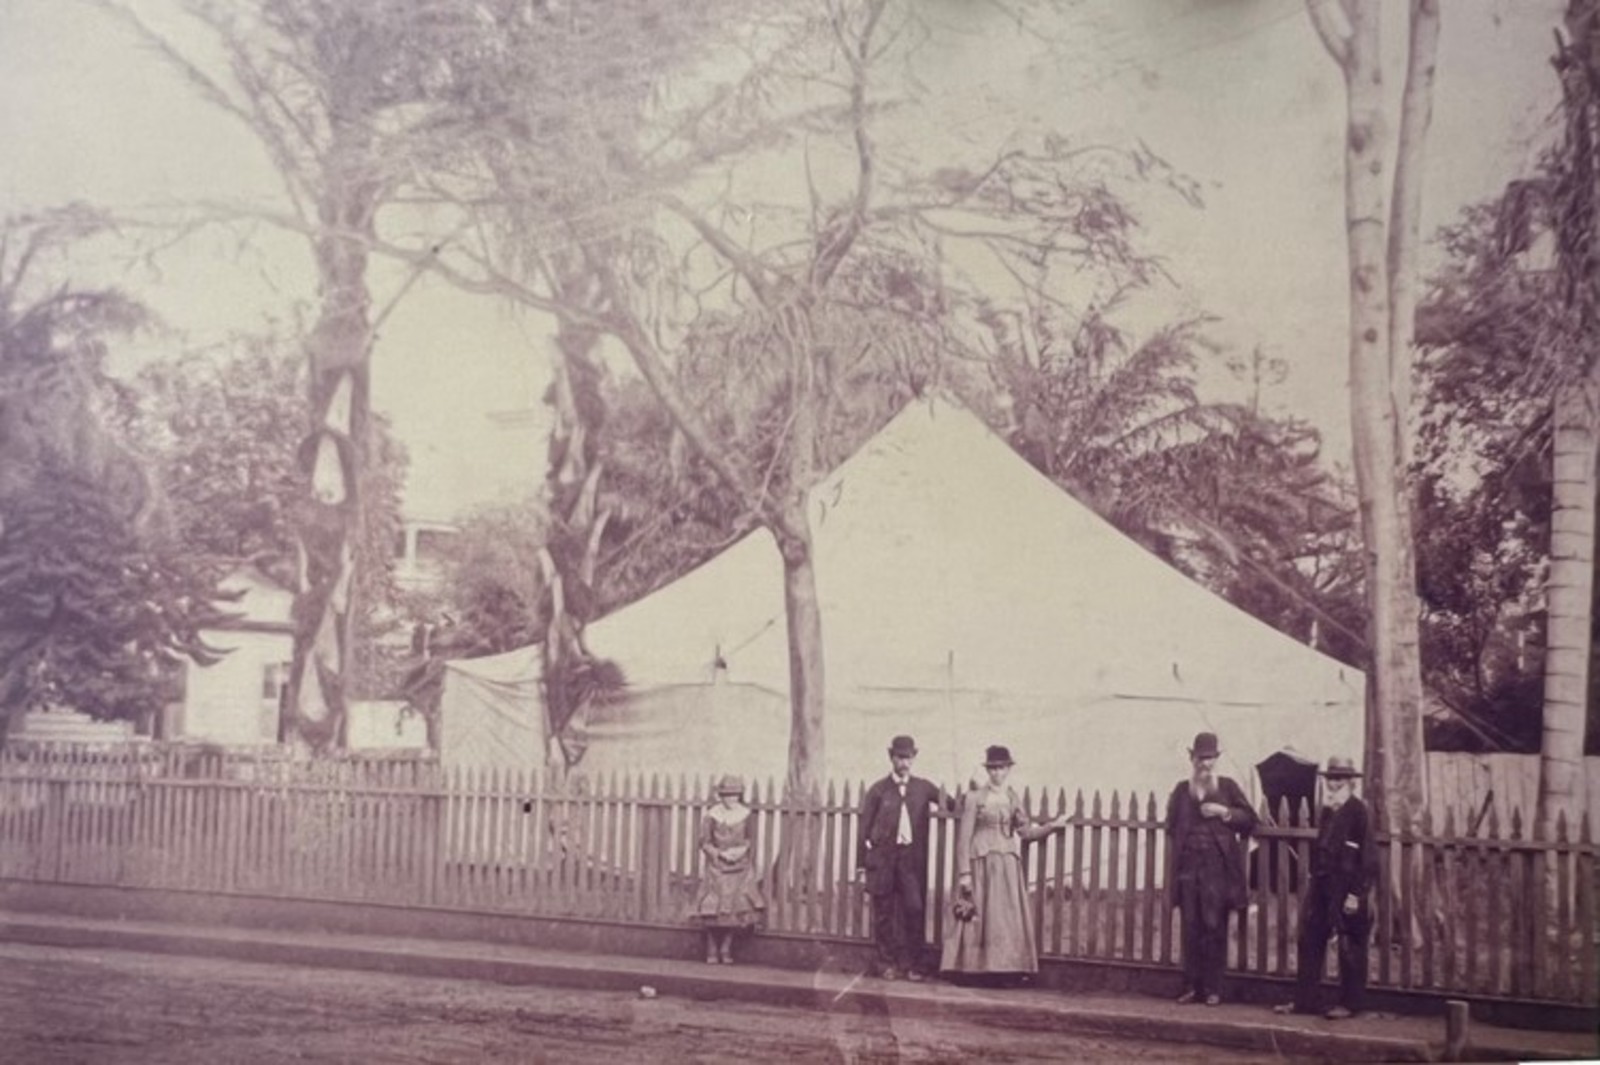 Photograph of the first evangelistic meeting held in Hawaii from January through March 1886. From Left to right: Birdie Healey, William Healey, Clara Healey, Loran A. Scott, and Abram La Rue. Photo courtesy of the Hawaii Conference. Shared by Michael W. Campbell.